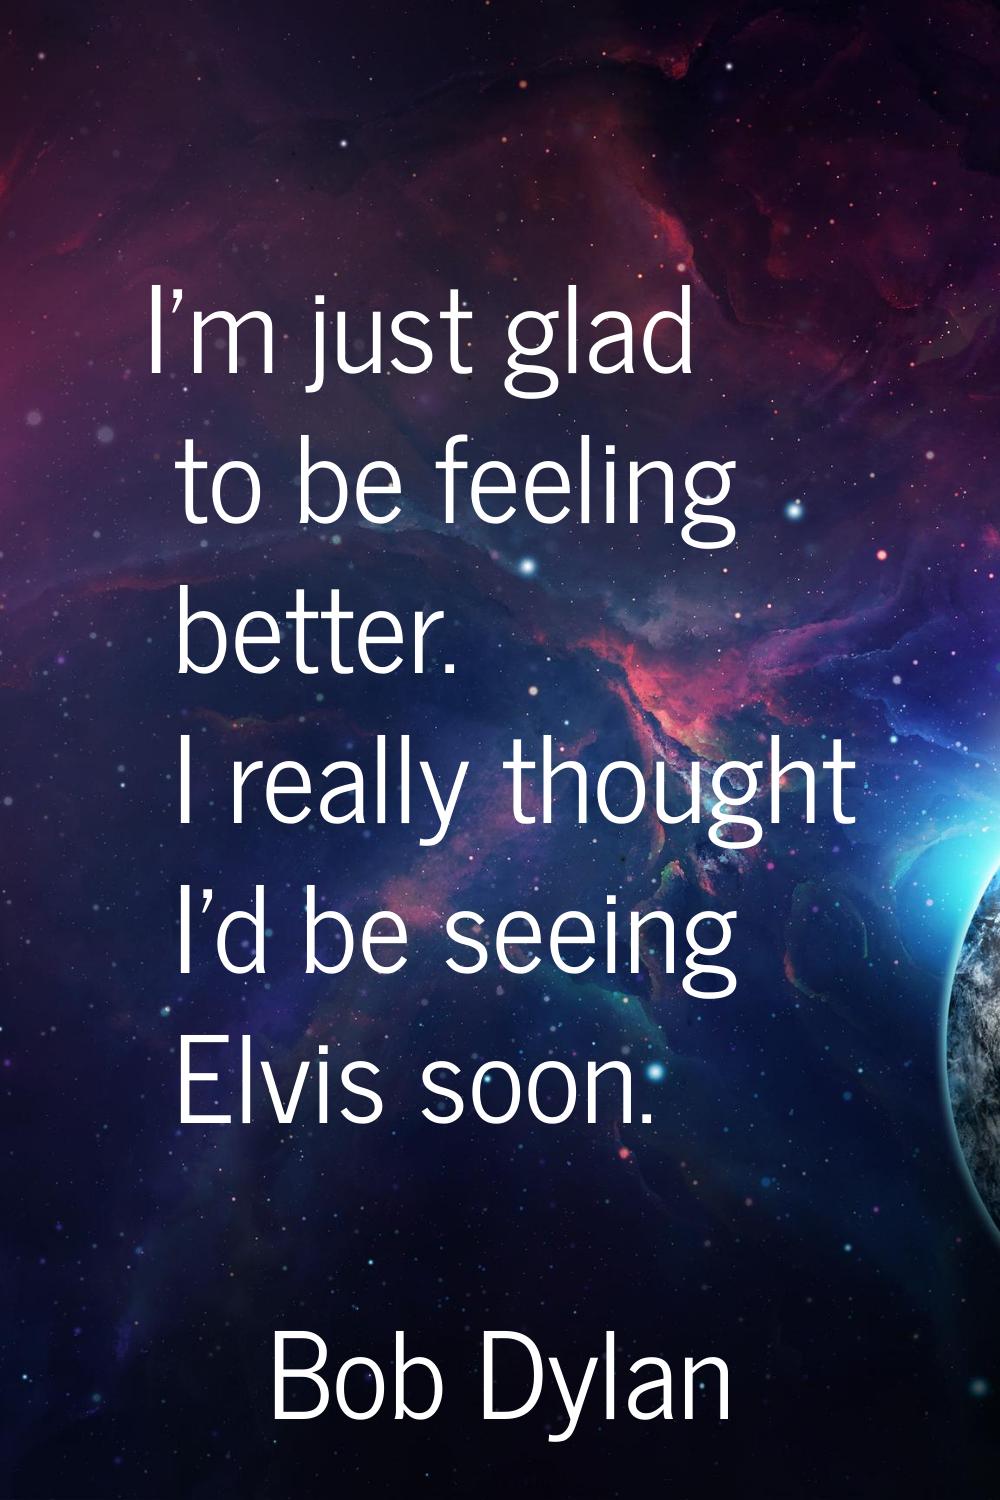 I'm just glad to be feeling better. I really thought I'd be seeing Elvis soon.